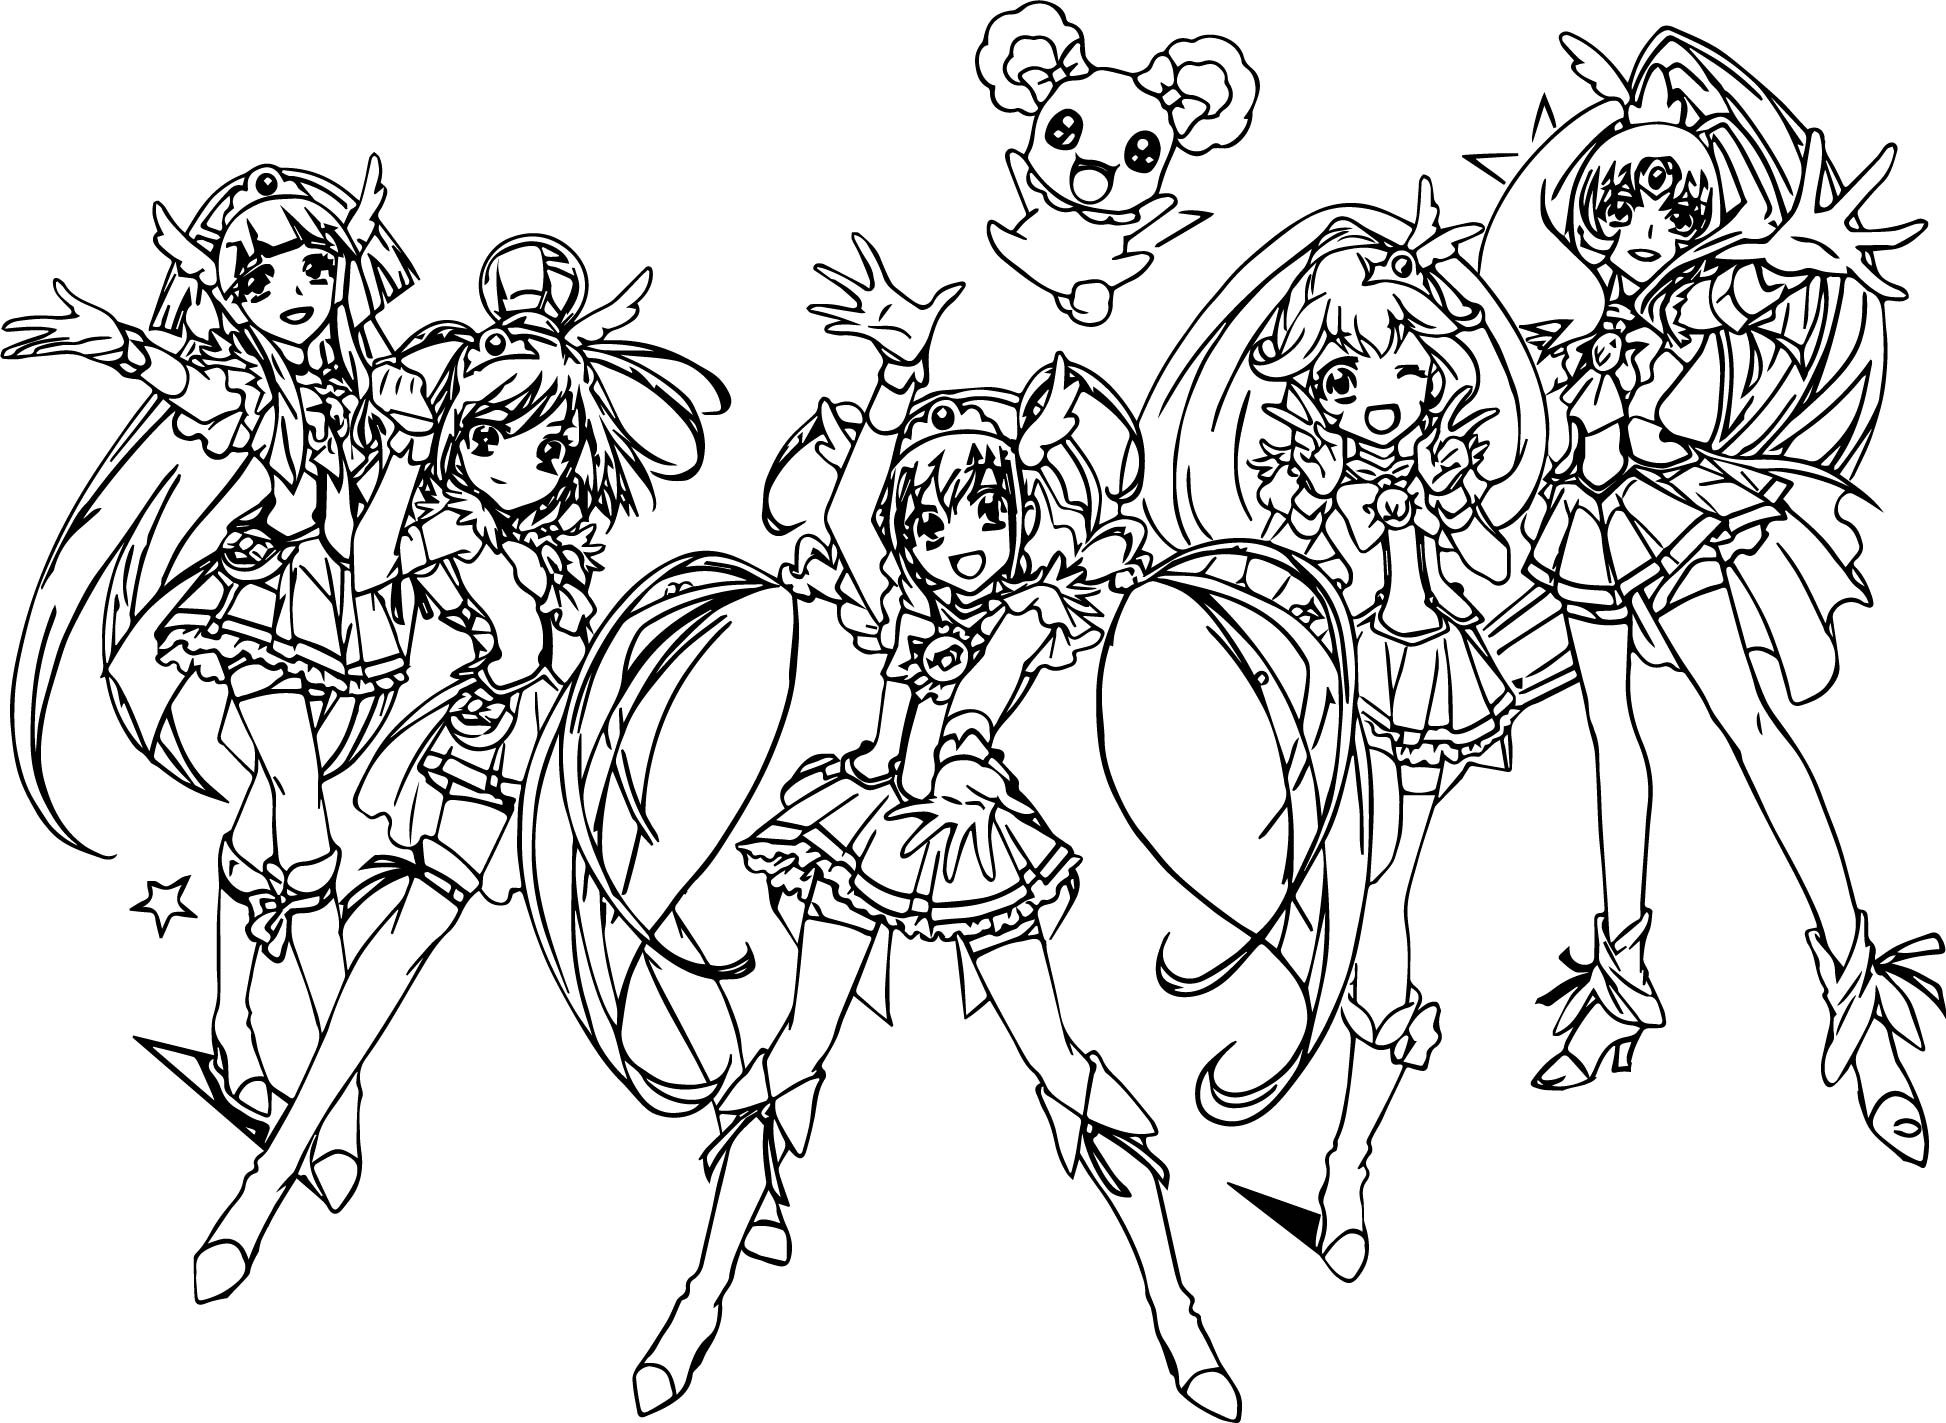 Glitter Force Coloring Pages Printable
 Glitter Force All Group Team Coloring Page